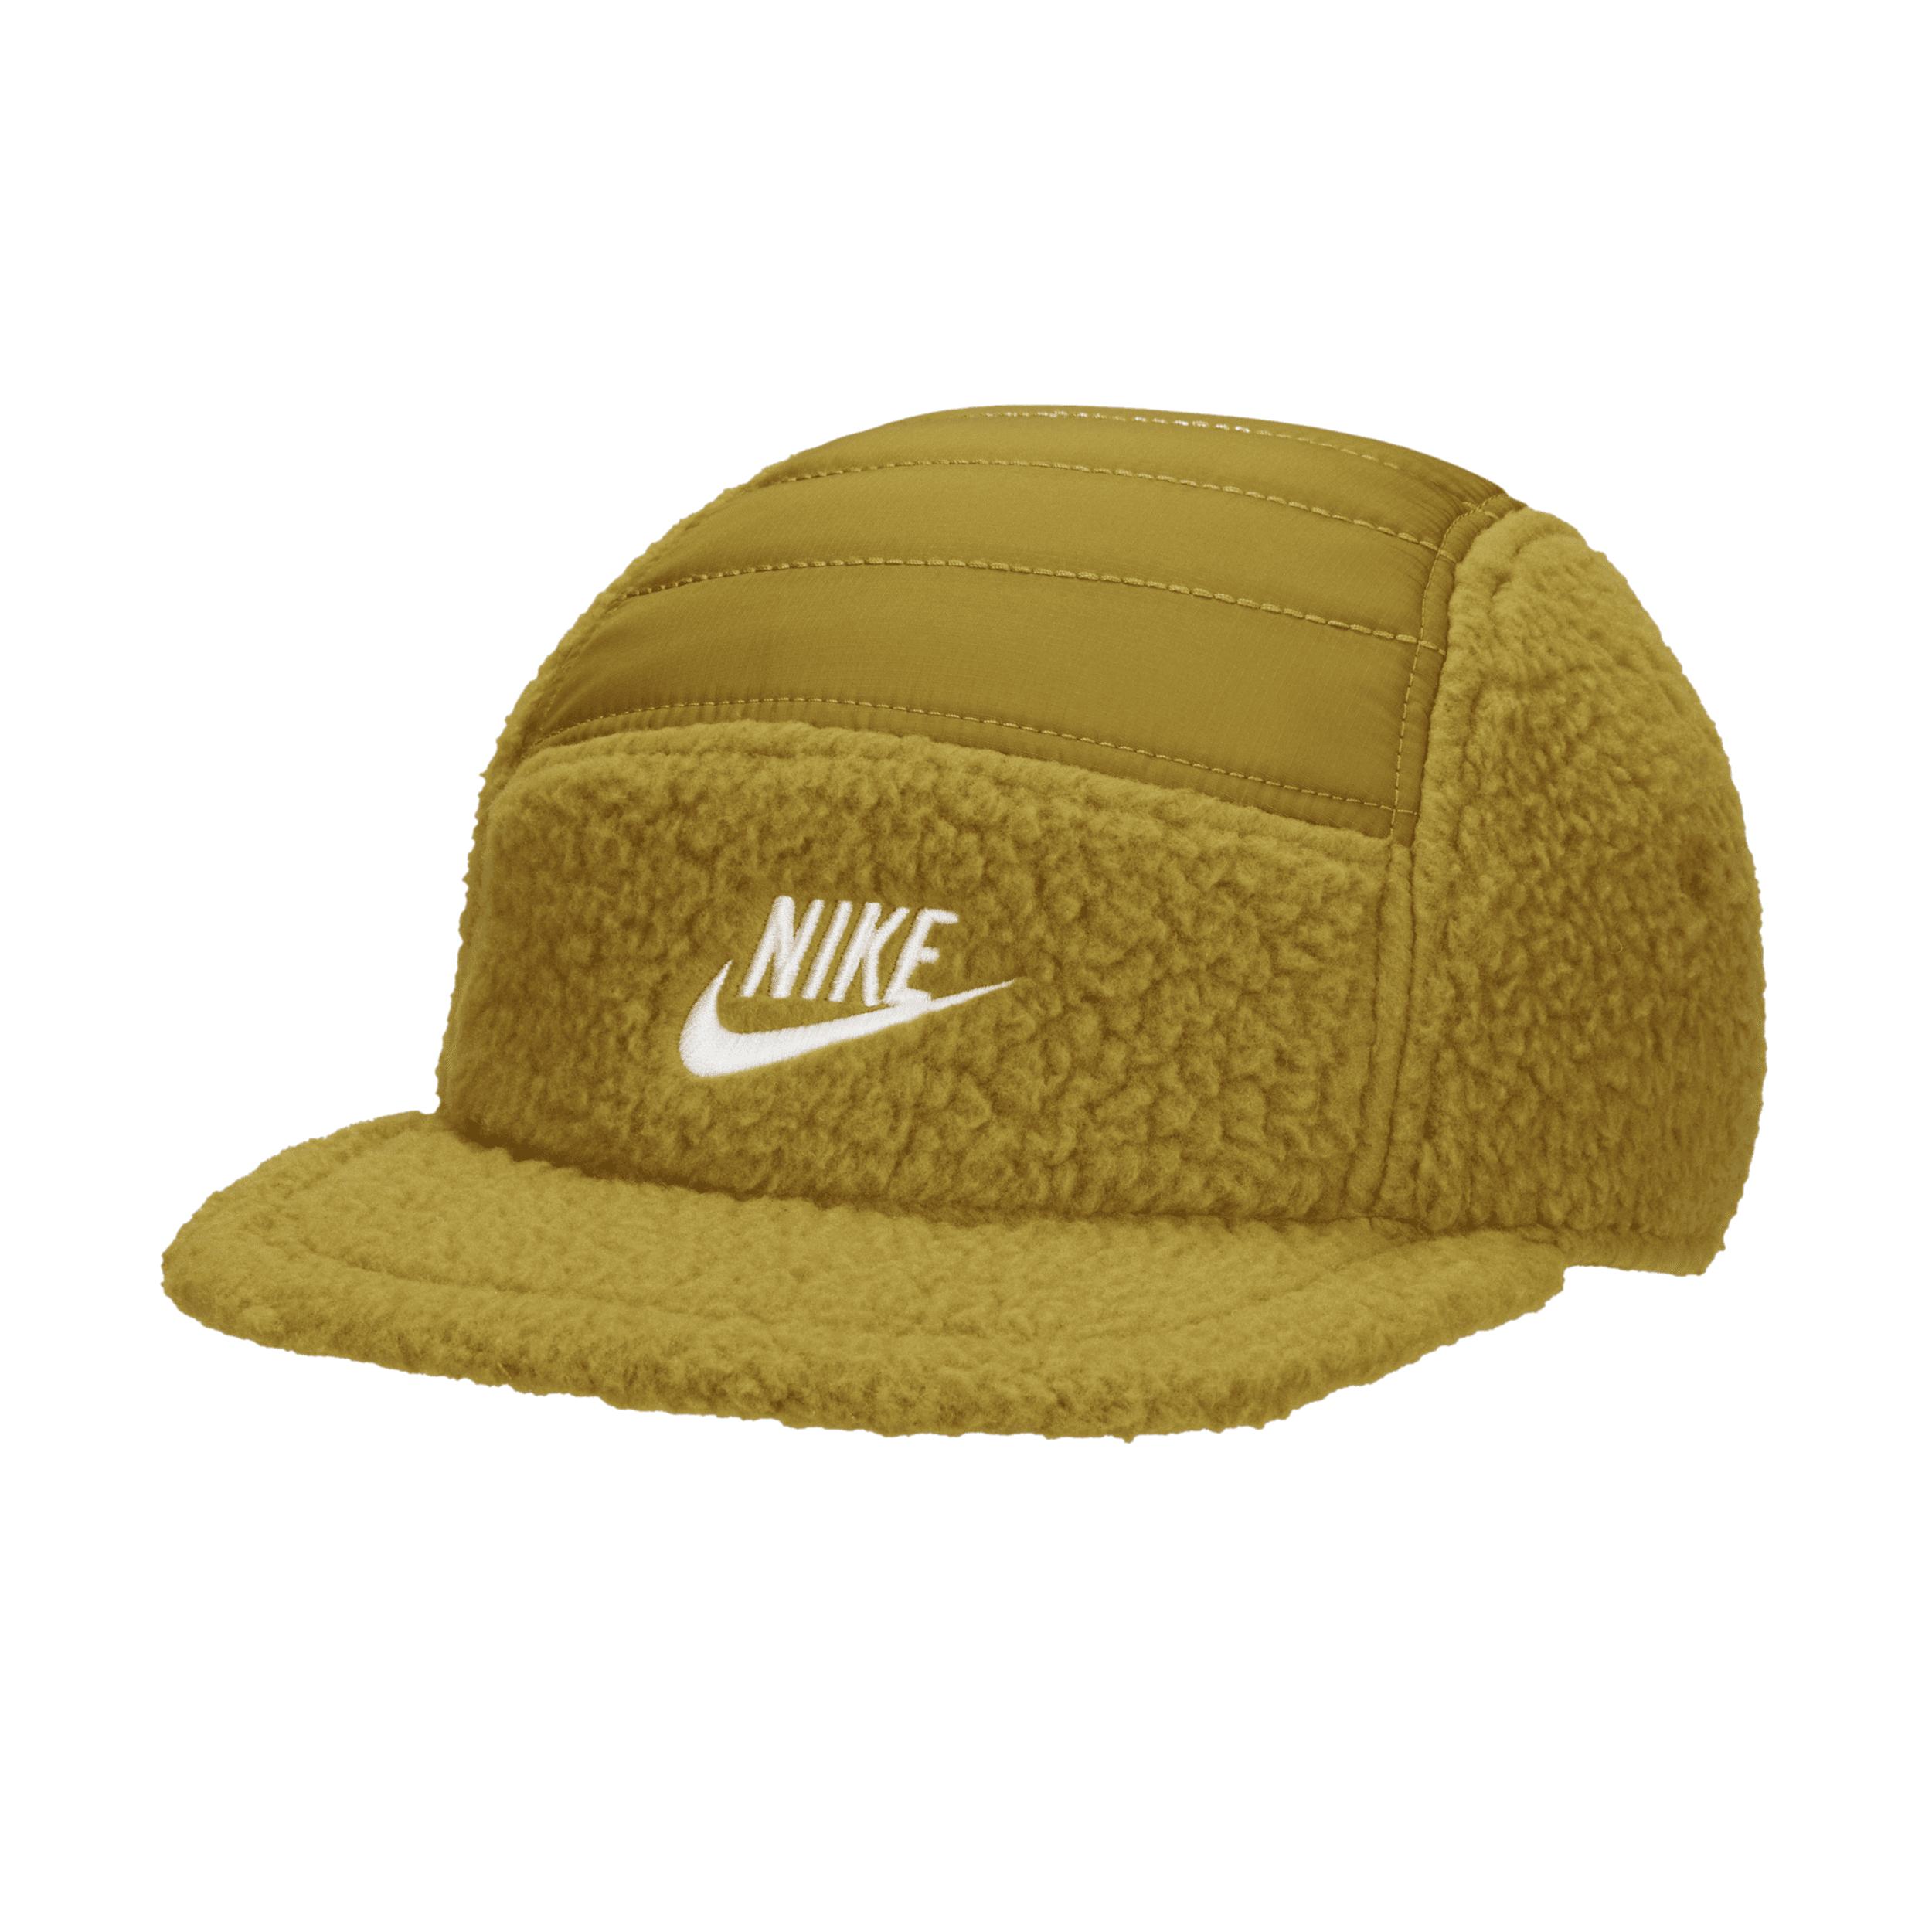 Nike Fly Cap Unstructured 5-panel Flat Bill Hat in Green | Lyst